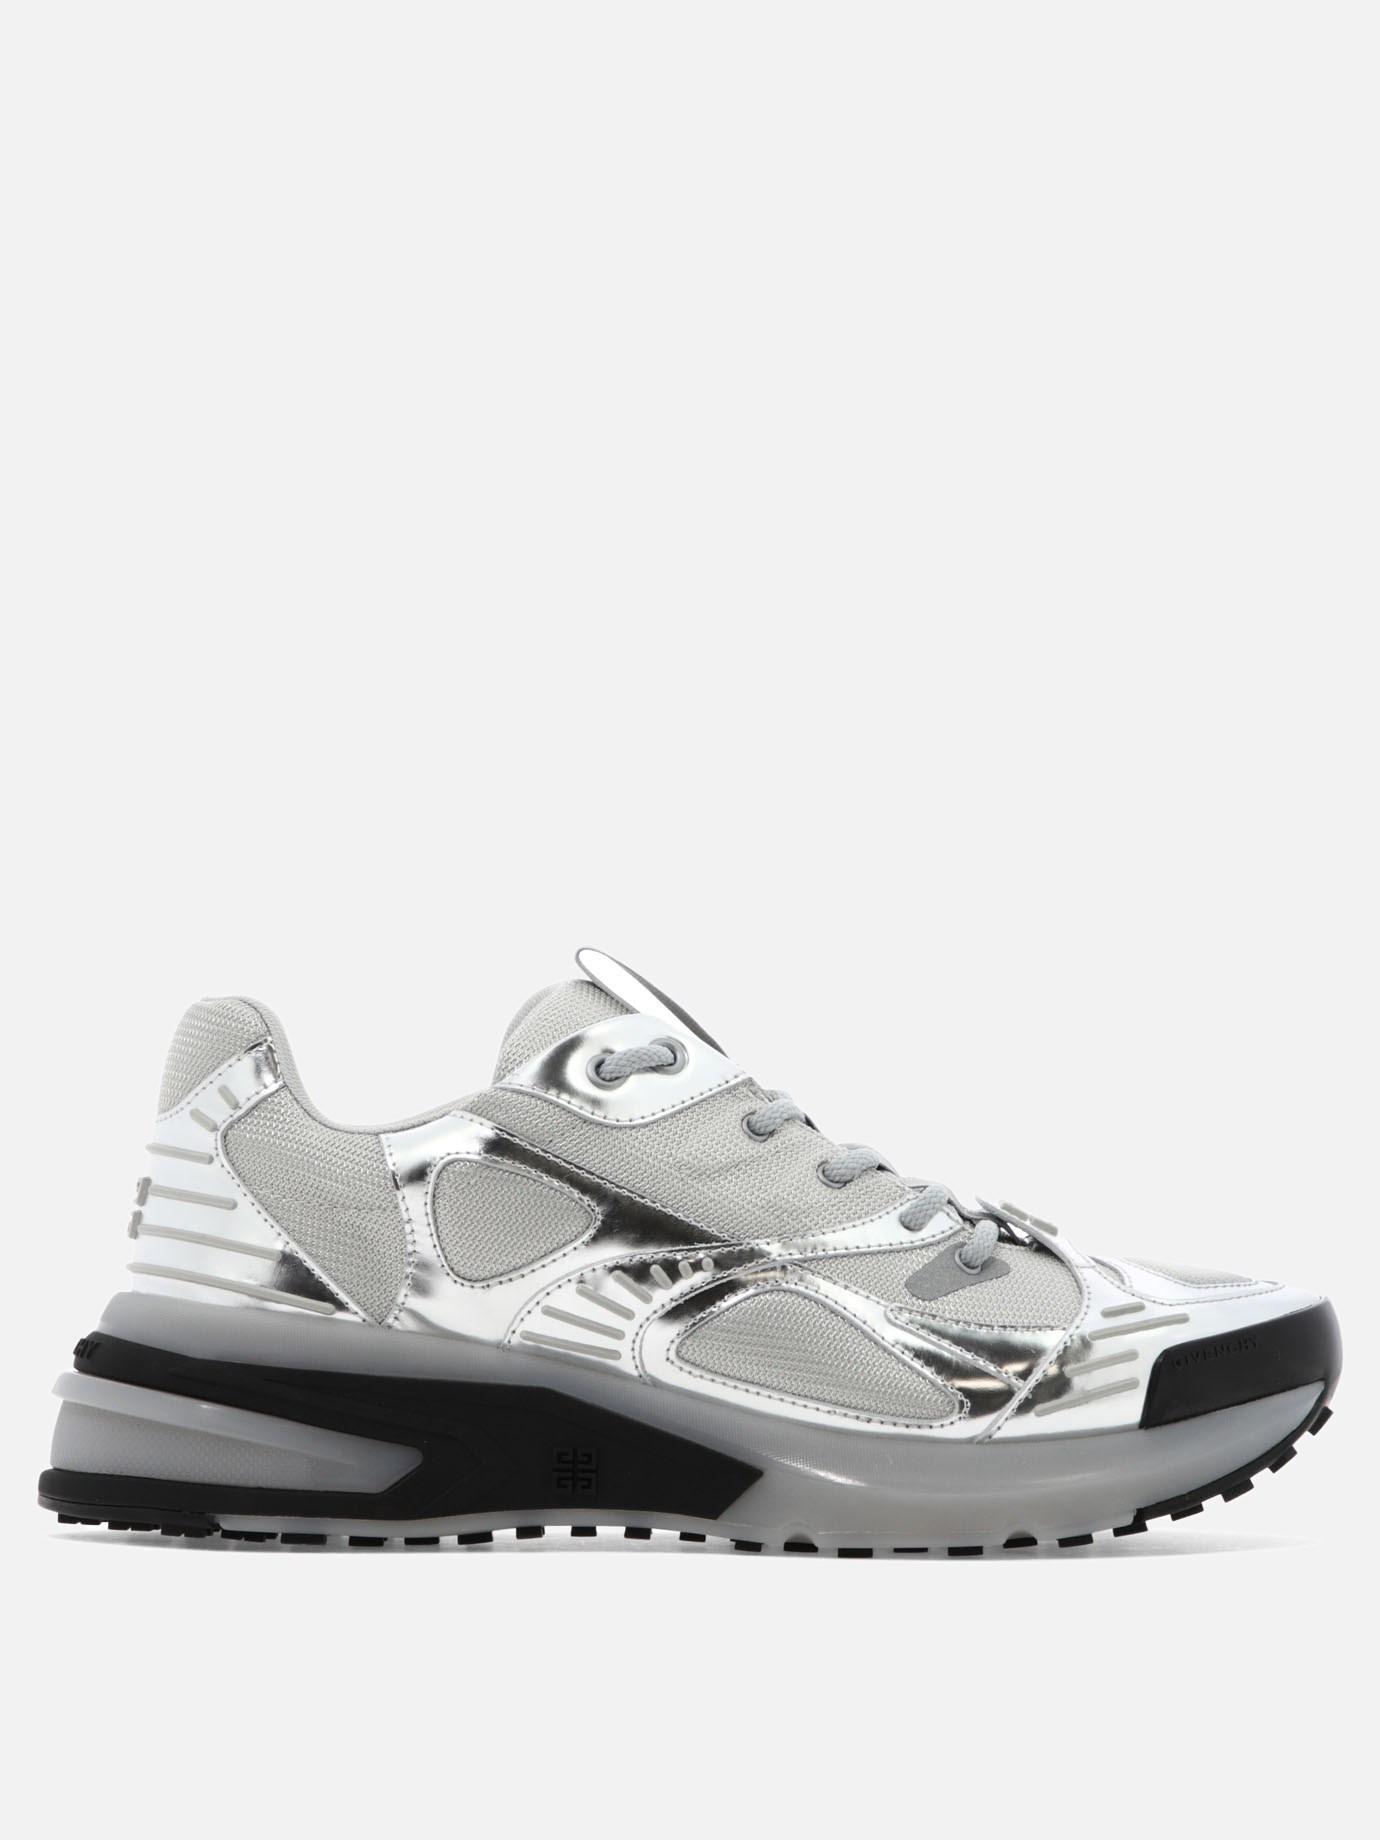  GIV 1  sneakersby Givenchy - 2